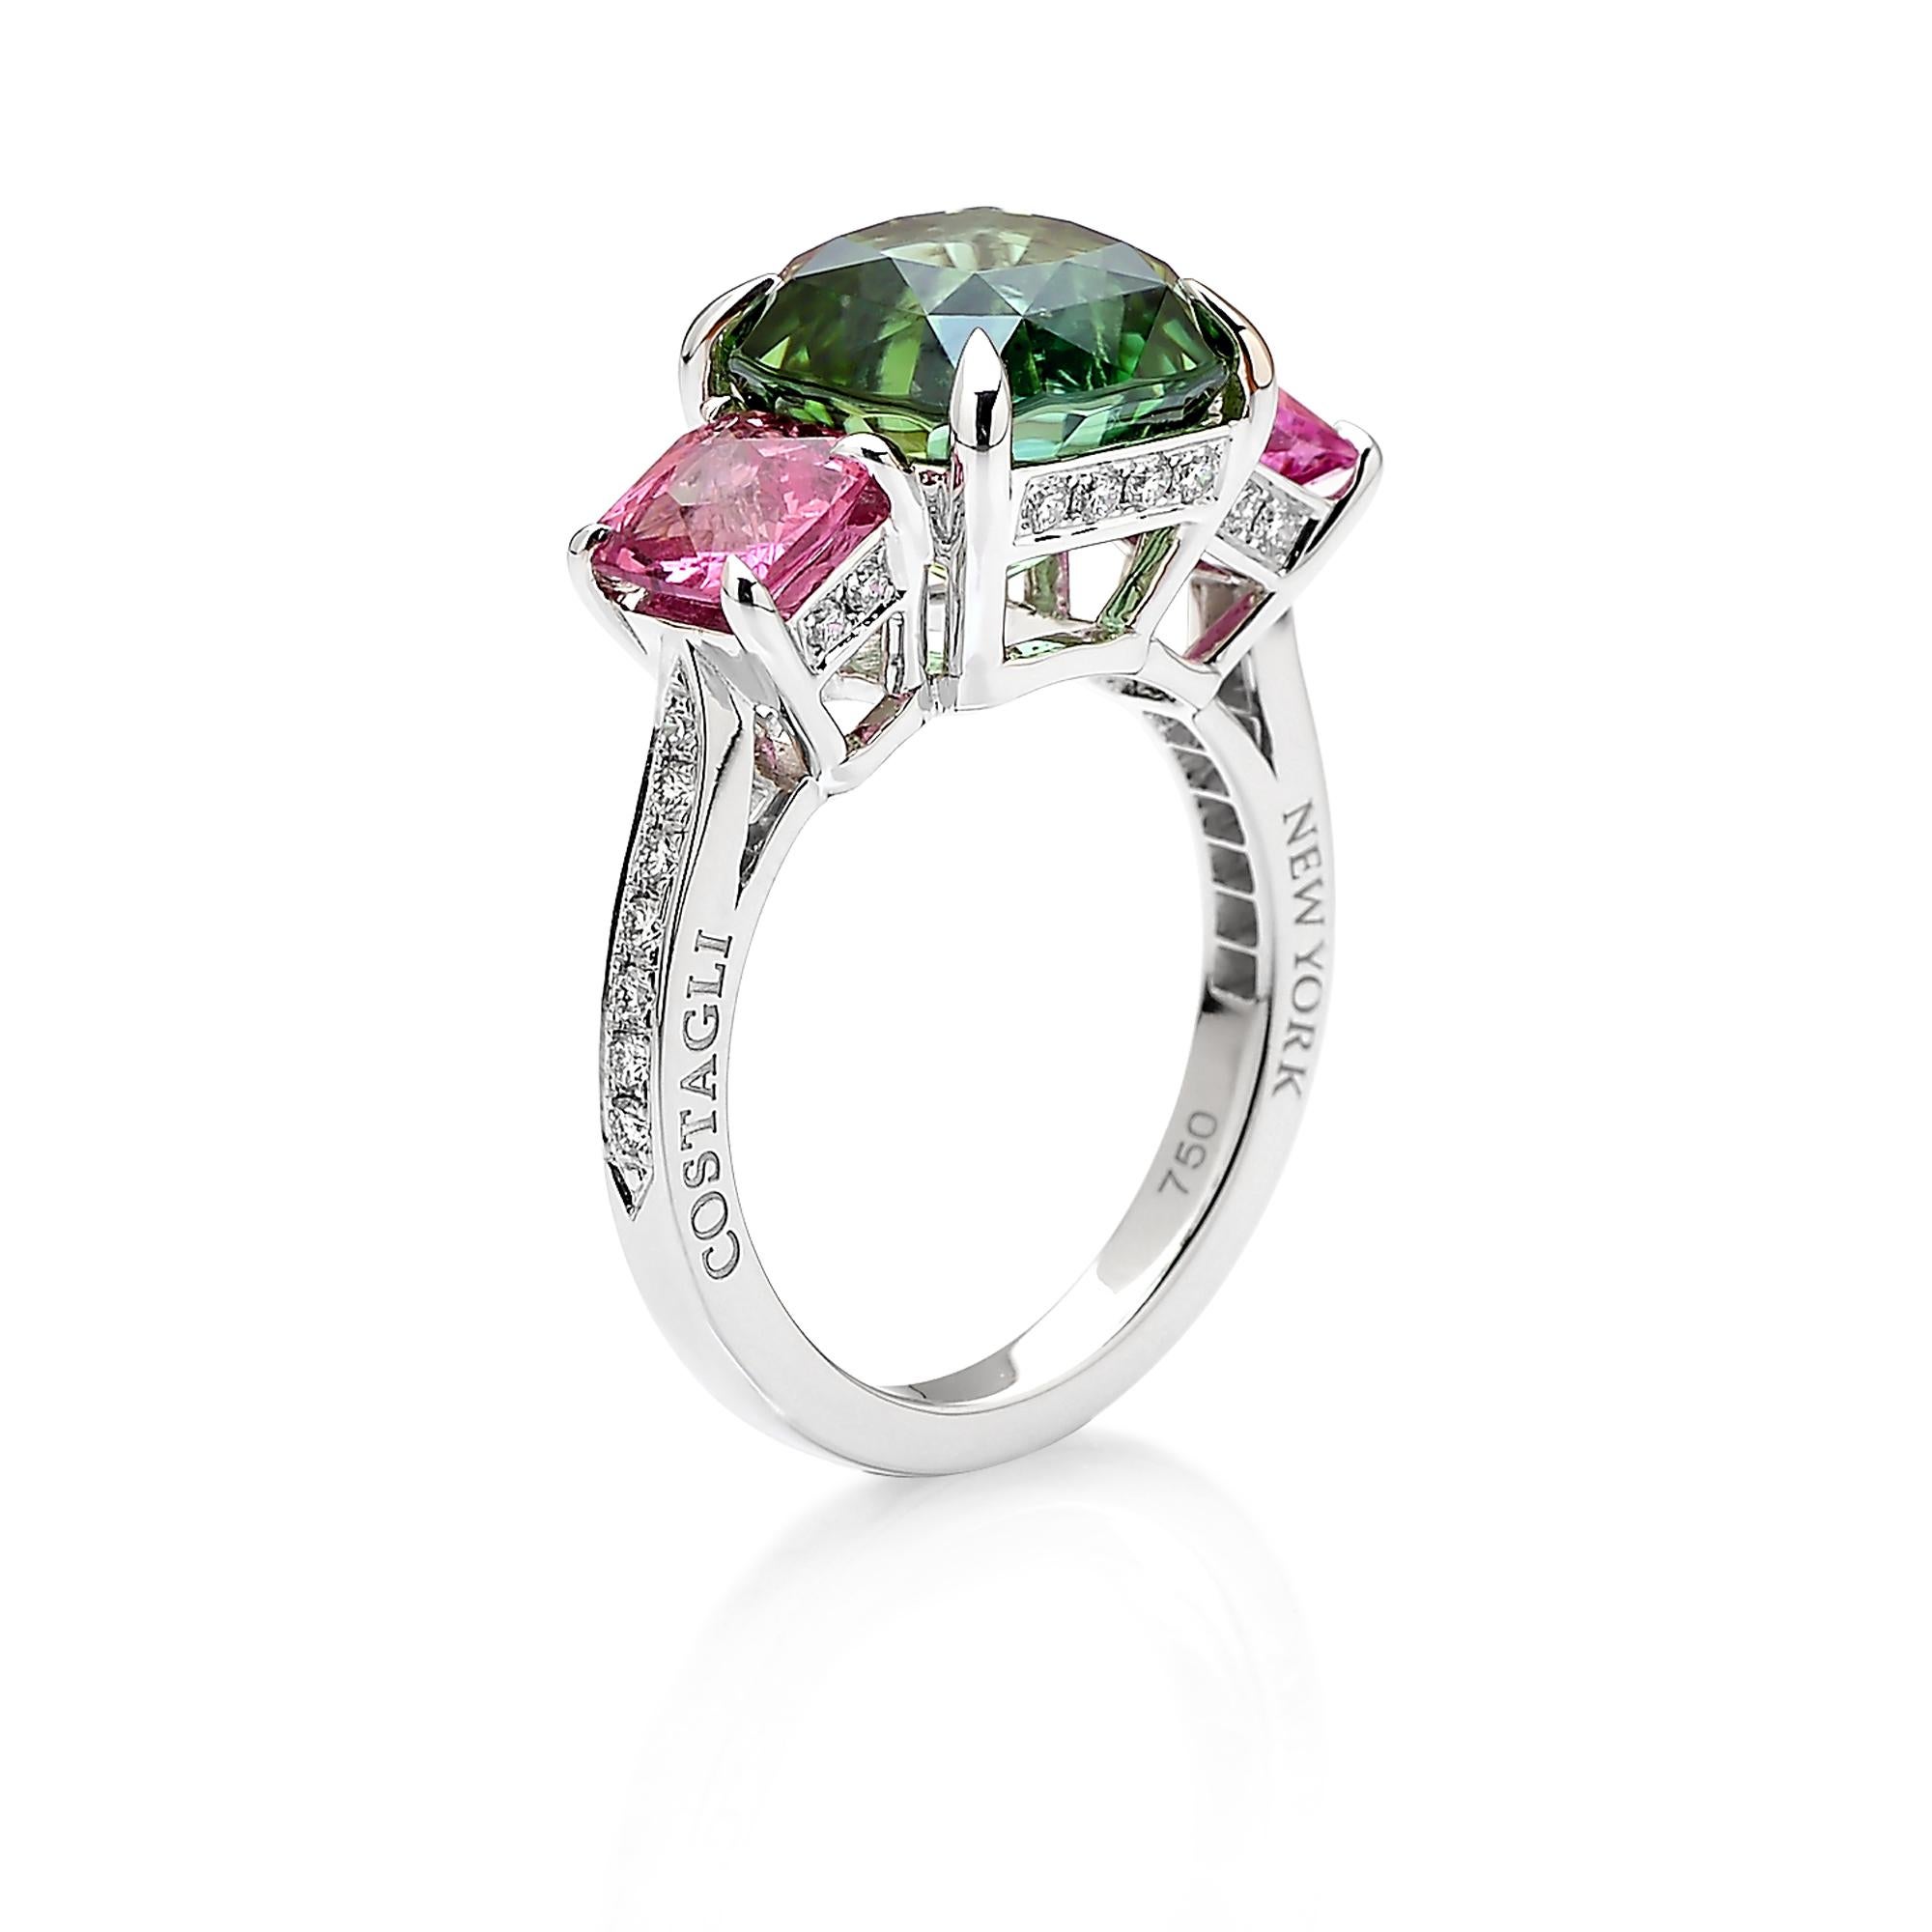 One of a kind cushion-shape green tourmaline ring with cushion-shape pink tourmaline side stones set in 18kt white gold with pave-set round, brilliant diamond detailing.

A classic ring silhouette paired with the unique color combination of the